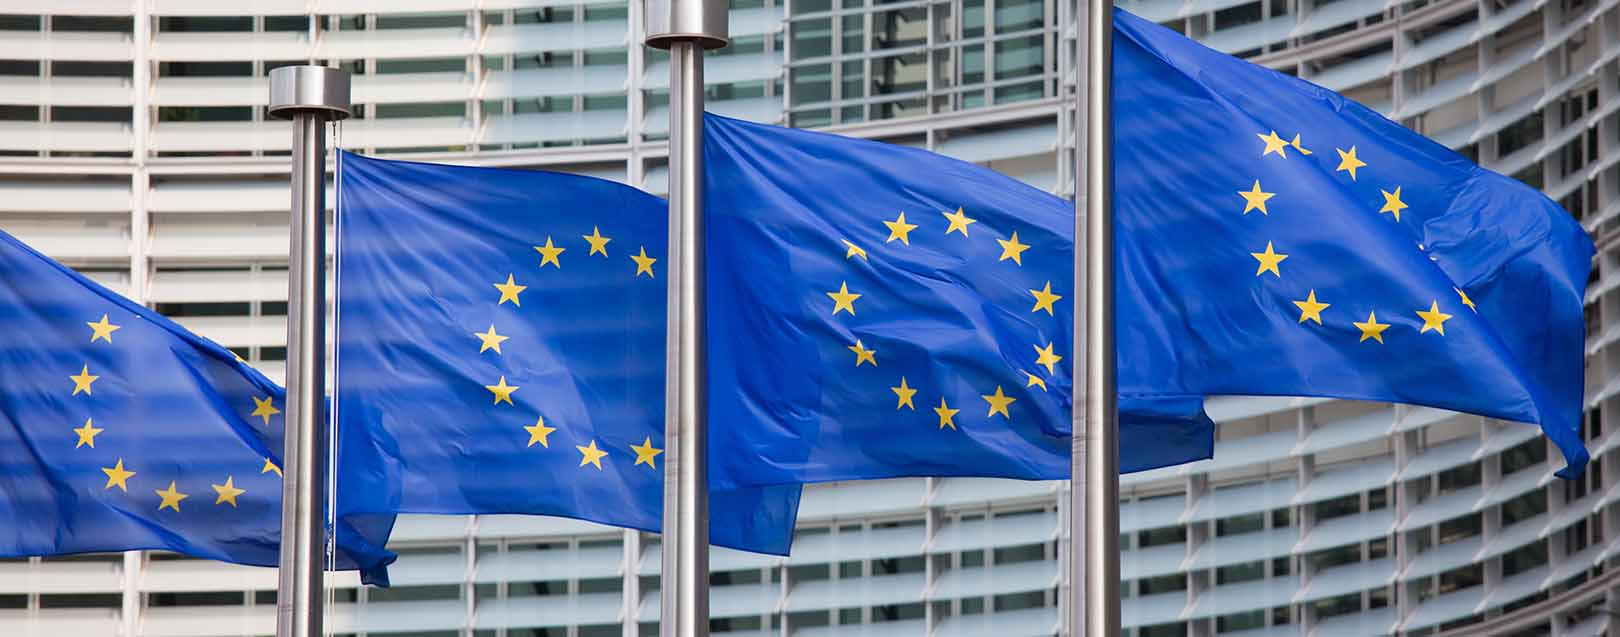 EU keen to conclude FTA talks with India